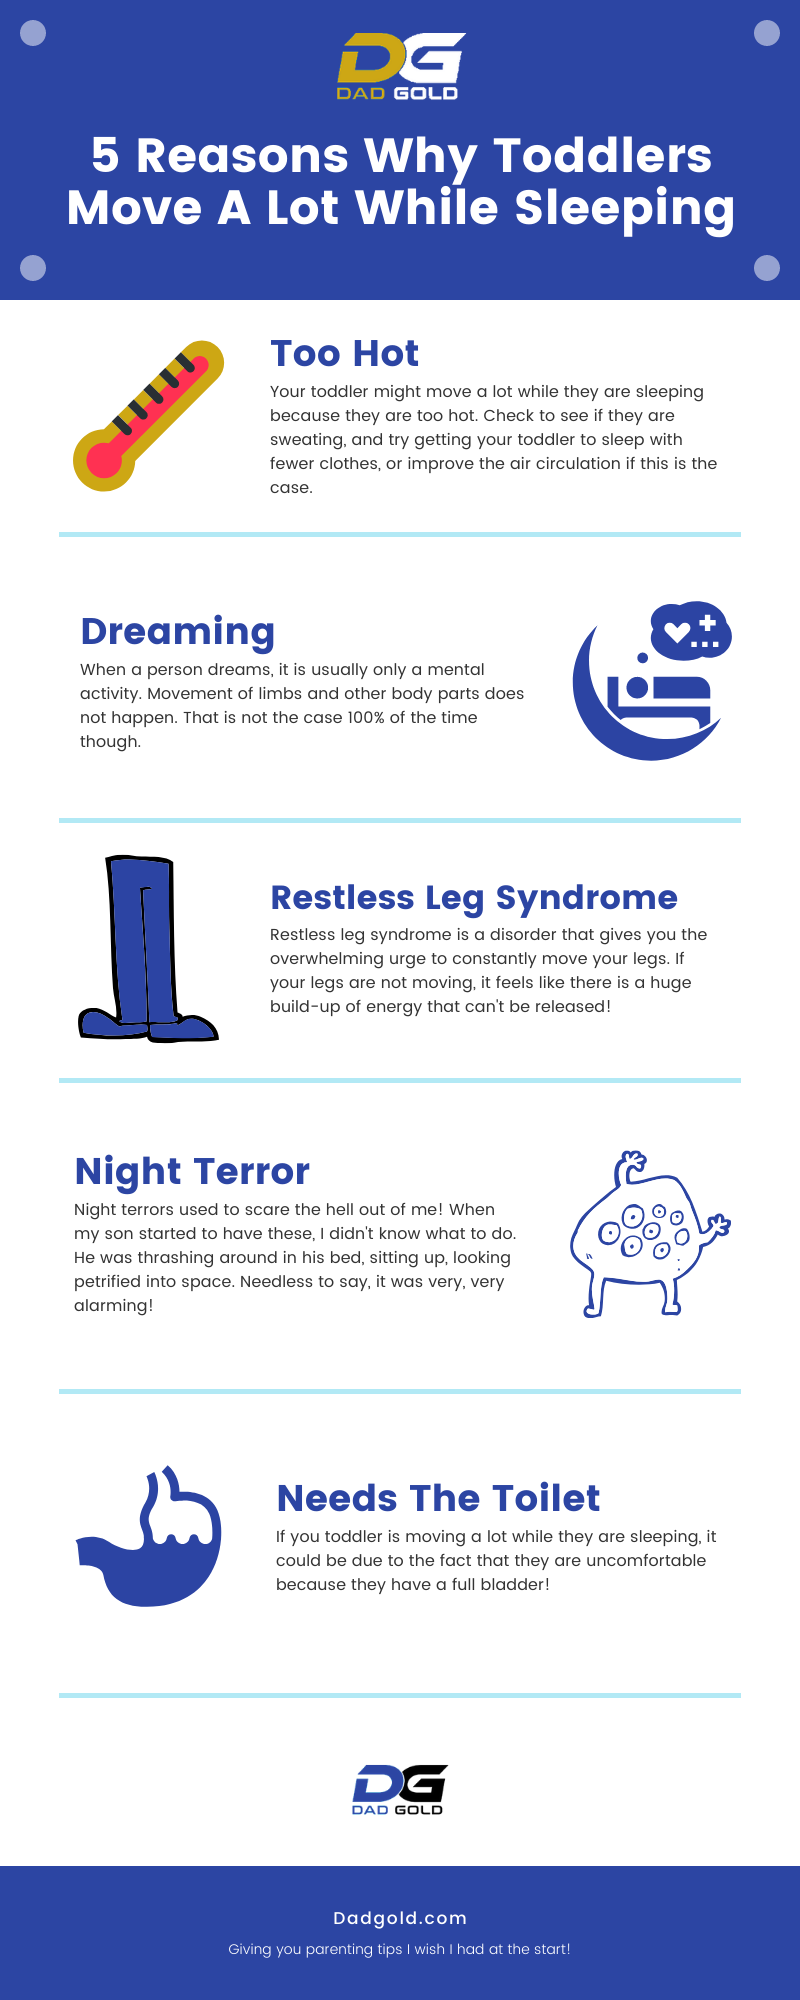 5 Reasons Why Toddlers Move A Lot While Sleeping Infographic Why Do Toddlers Move A Lot While Sleeping